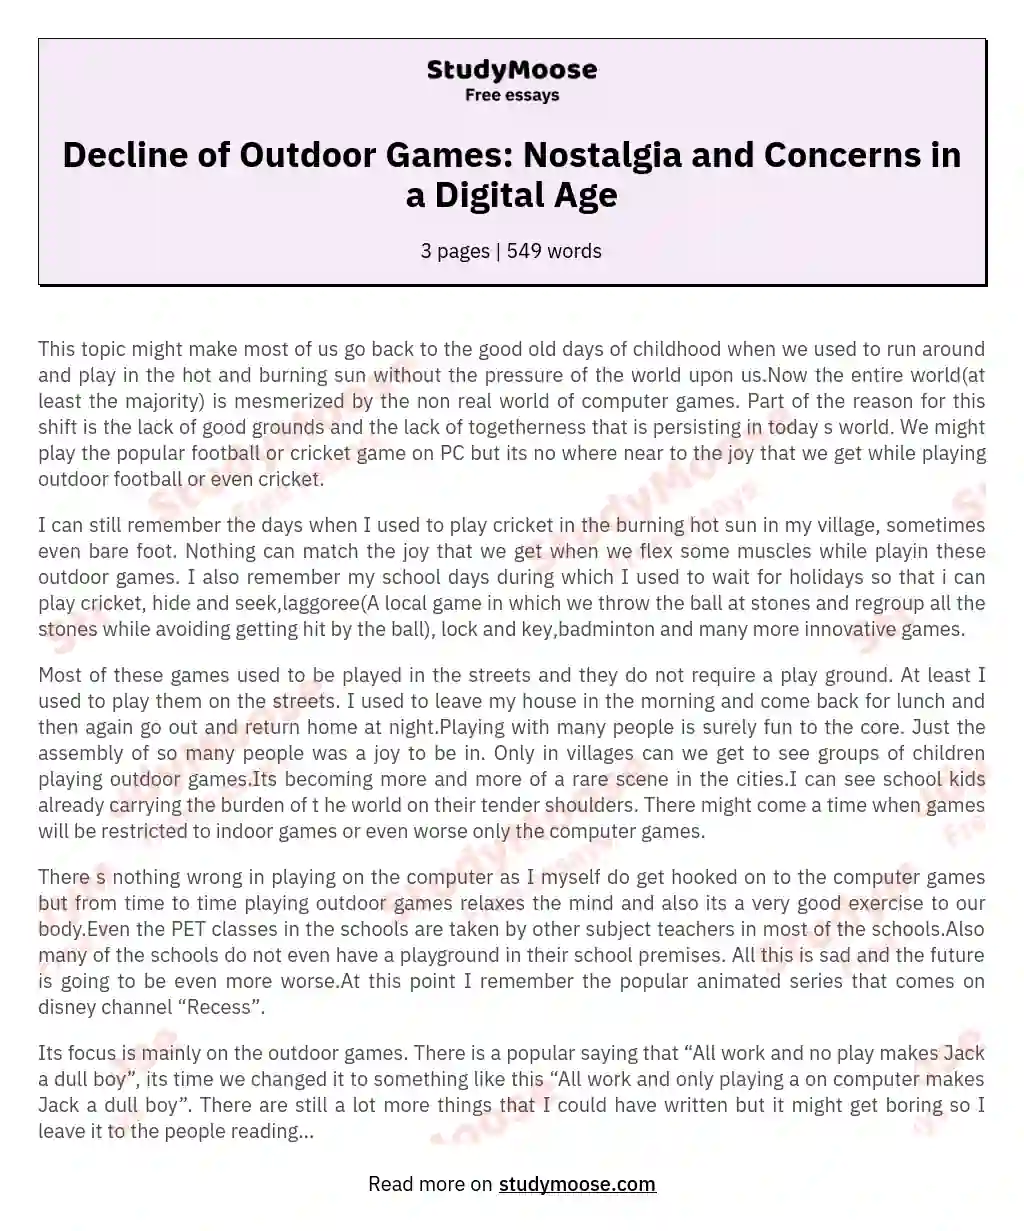 Decline of Outdoor Games: Nostalgia and Concerns in a Digital Age essay